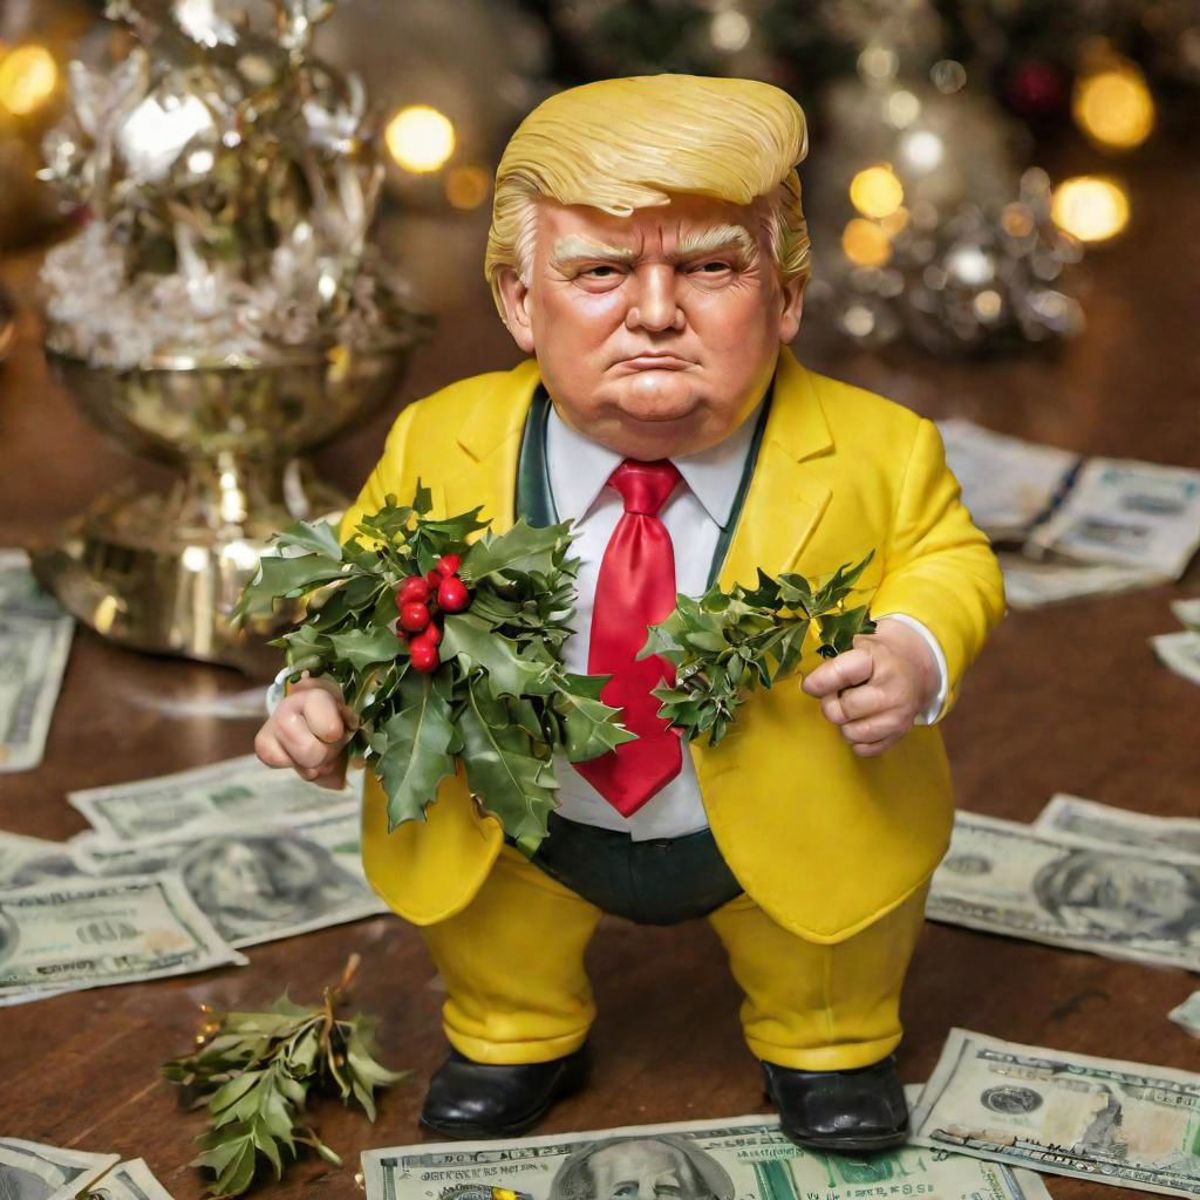 A Trump Doll with a Red Tie and a Wreath.